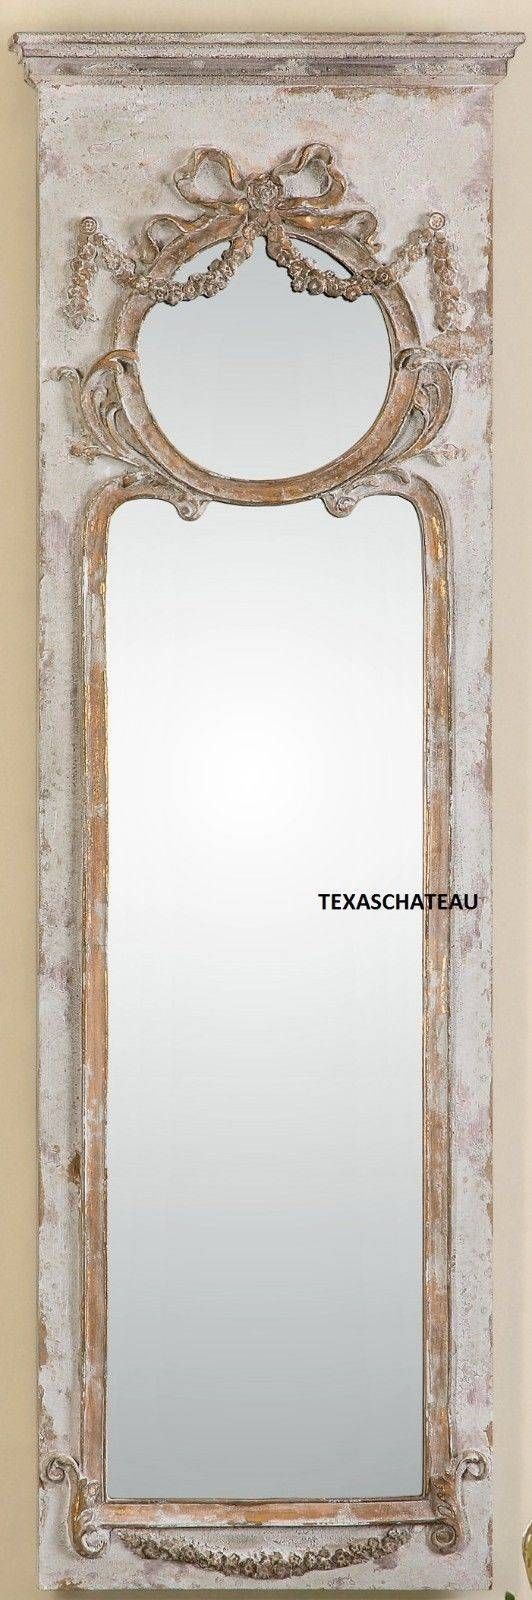 Large Ornate French Antique Cream Gold Trumeau Mirror Dressing Regarding Cream Ornate Mirrors (View 11 of 25)